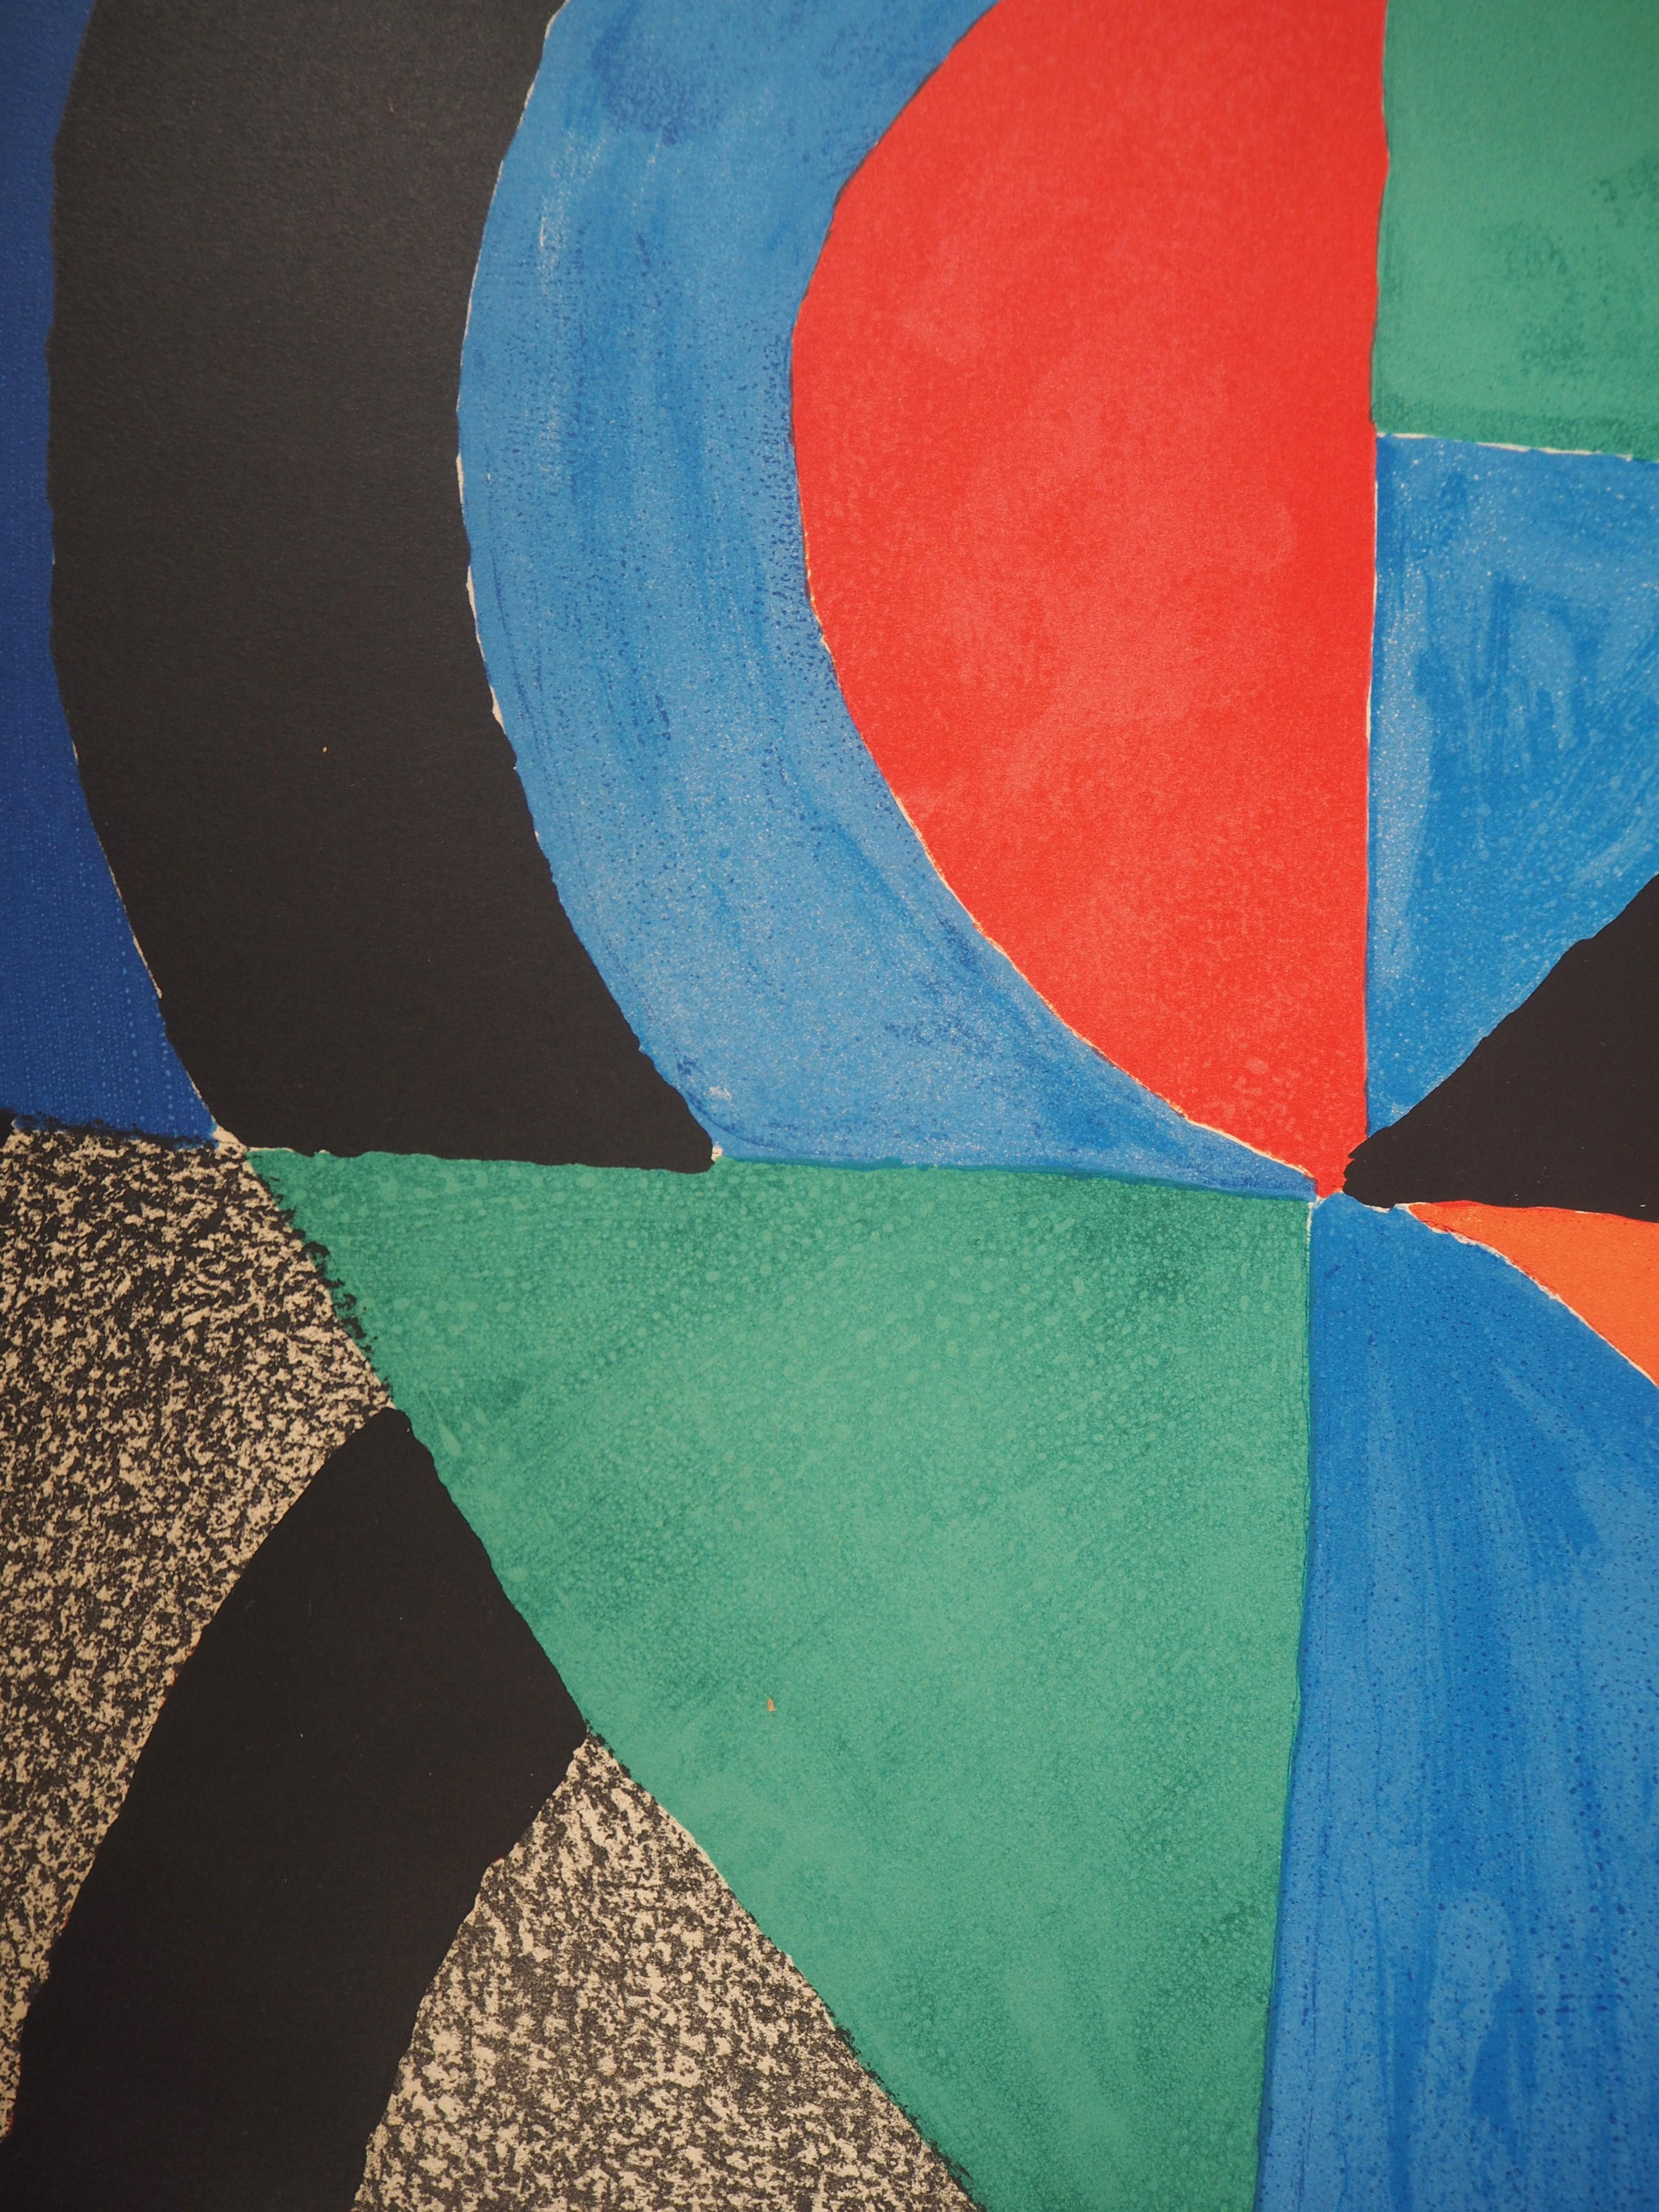 Sonia DELAUNAY
Rythm and colors (Tall Icon), c. 1970

Original lithograph 
Signed in pencil
Justified Epreuve d'artiste (artist proof)
On Arches vellum 89 x 62 cm (c. 36 x 25 in)

Good condition, paper lightly yellowed and small defects at the edge